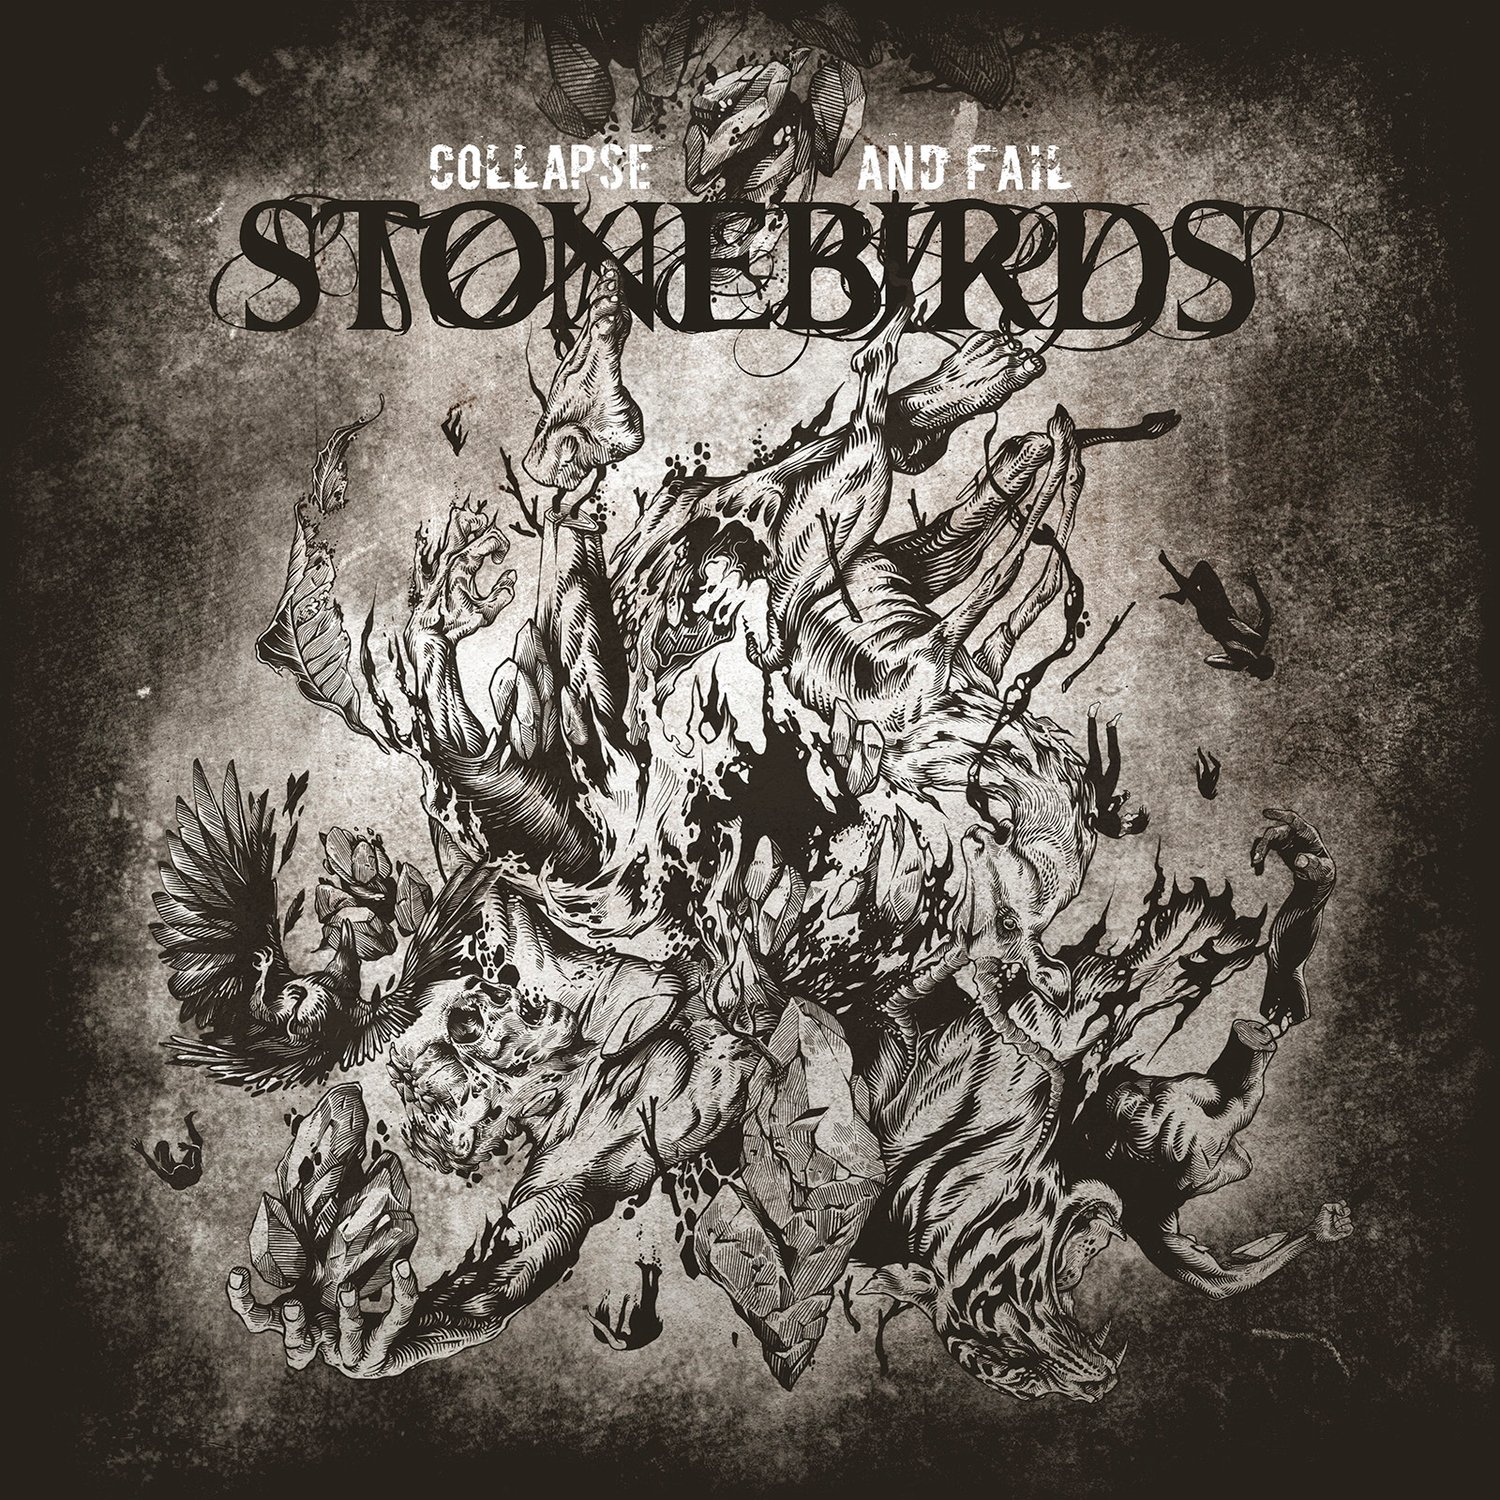 Image of Stonebirds - Collapse and Fail Deluxe Vinyl Editions